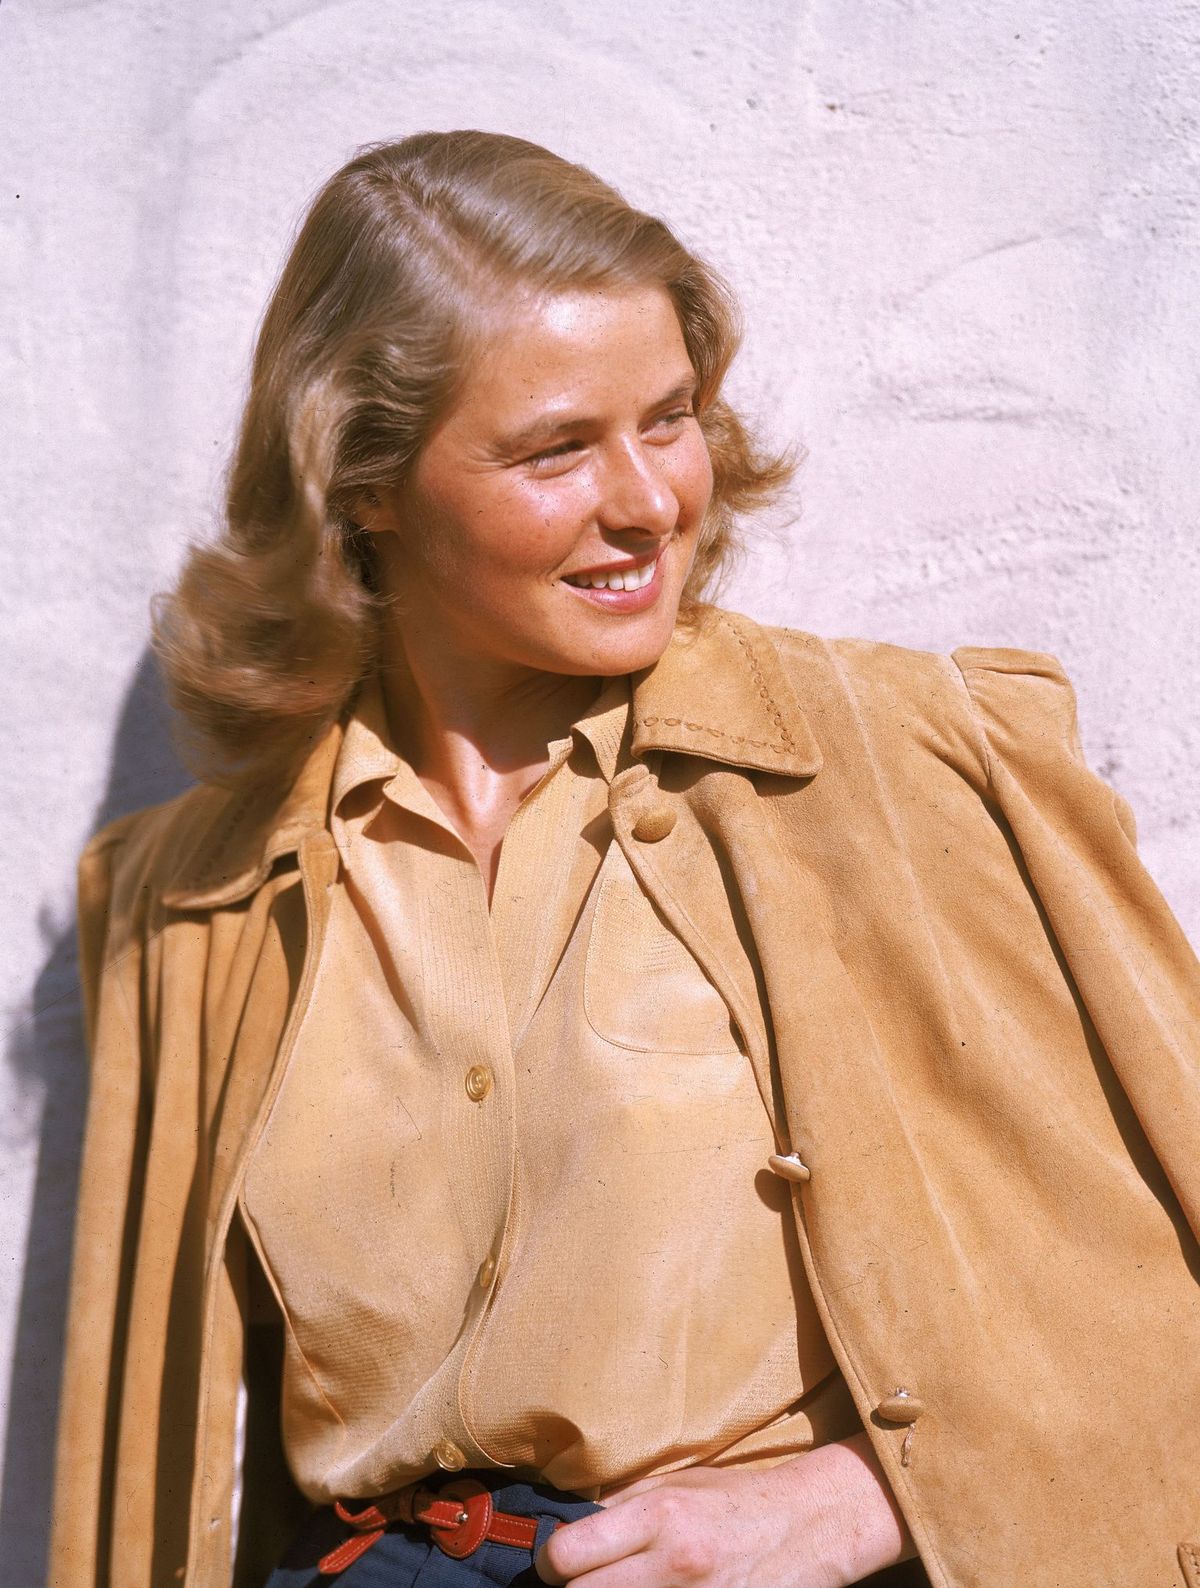 Ingrid Bergman smiles as she poses outdoors, wearing a tan leather jacket, circa on January 01, 1945. | Photo: Getty Images